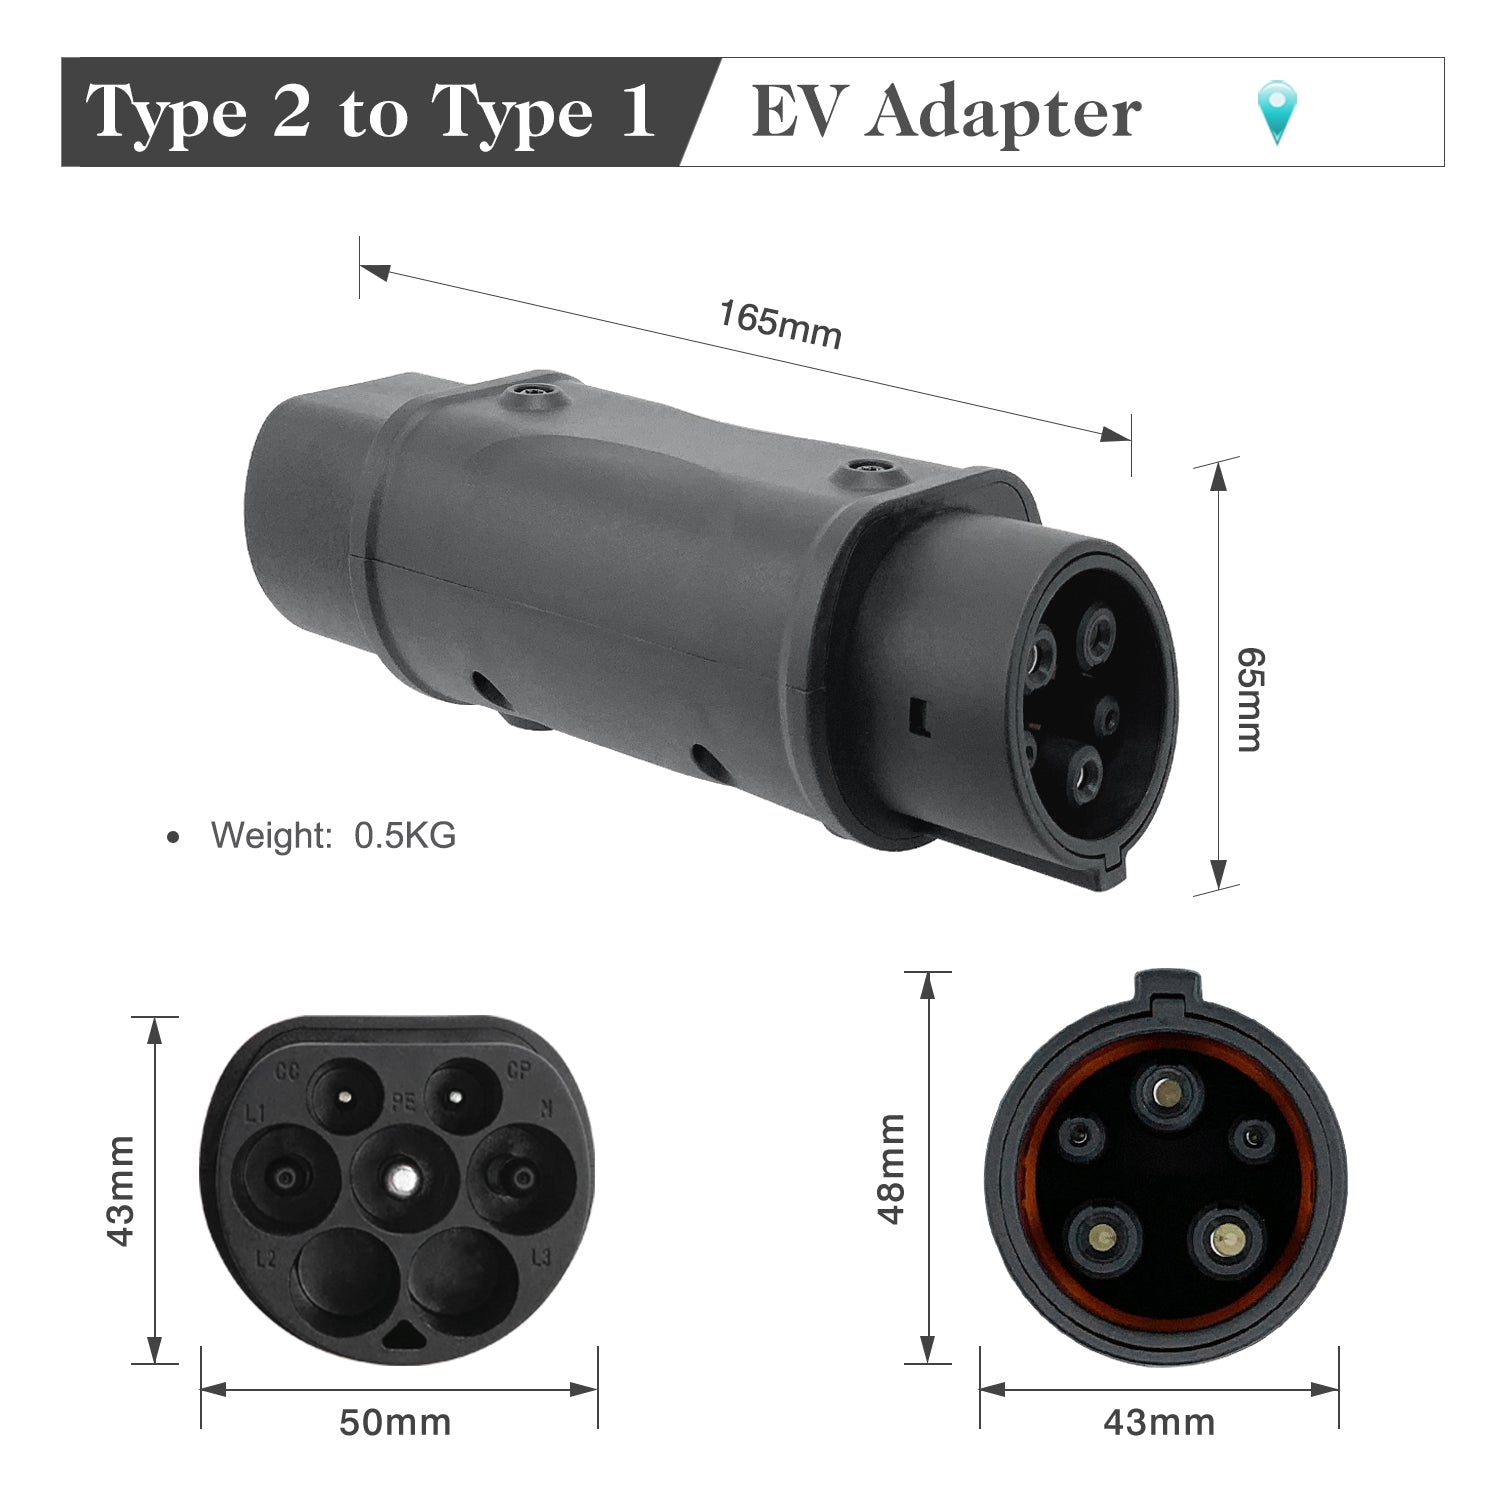 Type 2 To Type 1 EV Adapter 32 Amp Electric Car Charging Cable Adapter